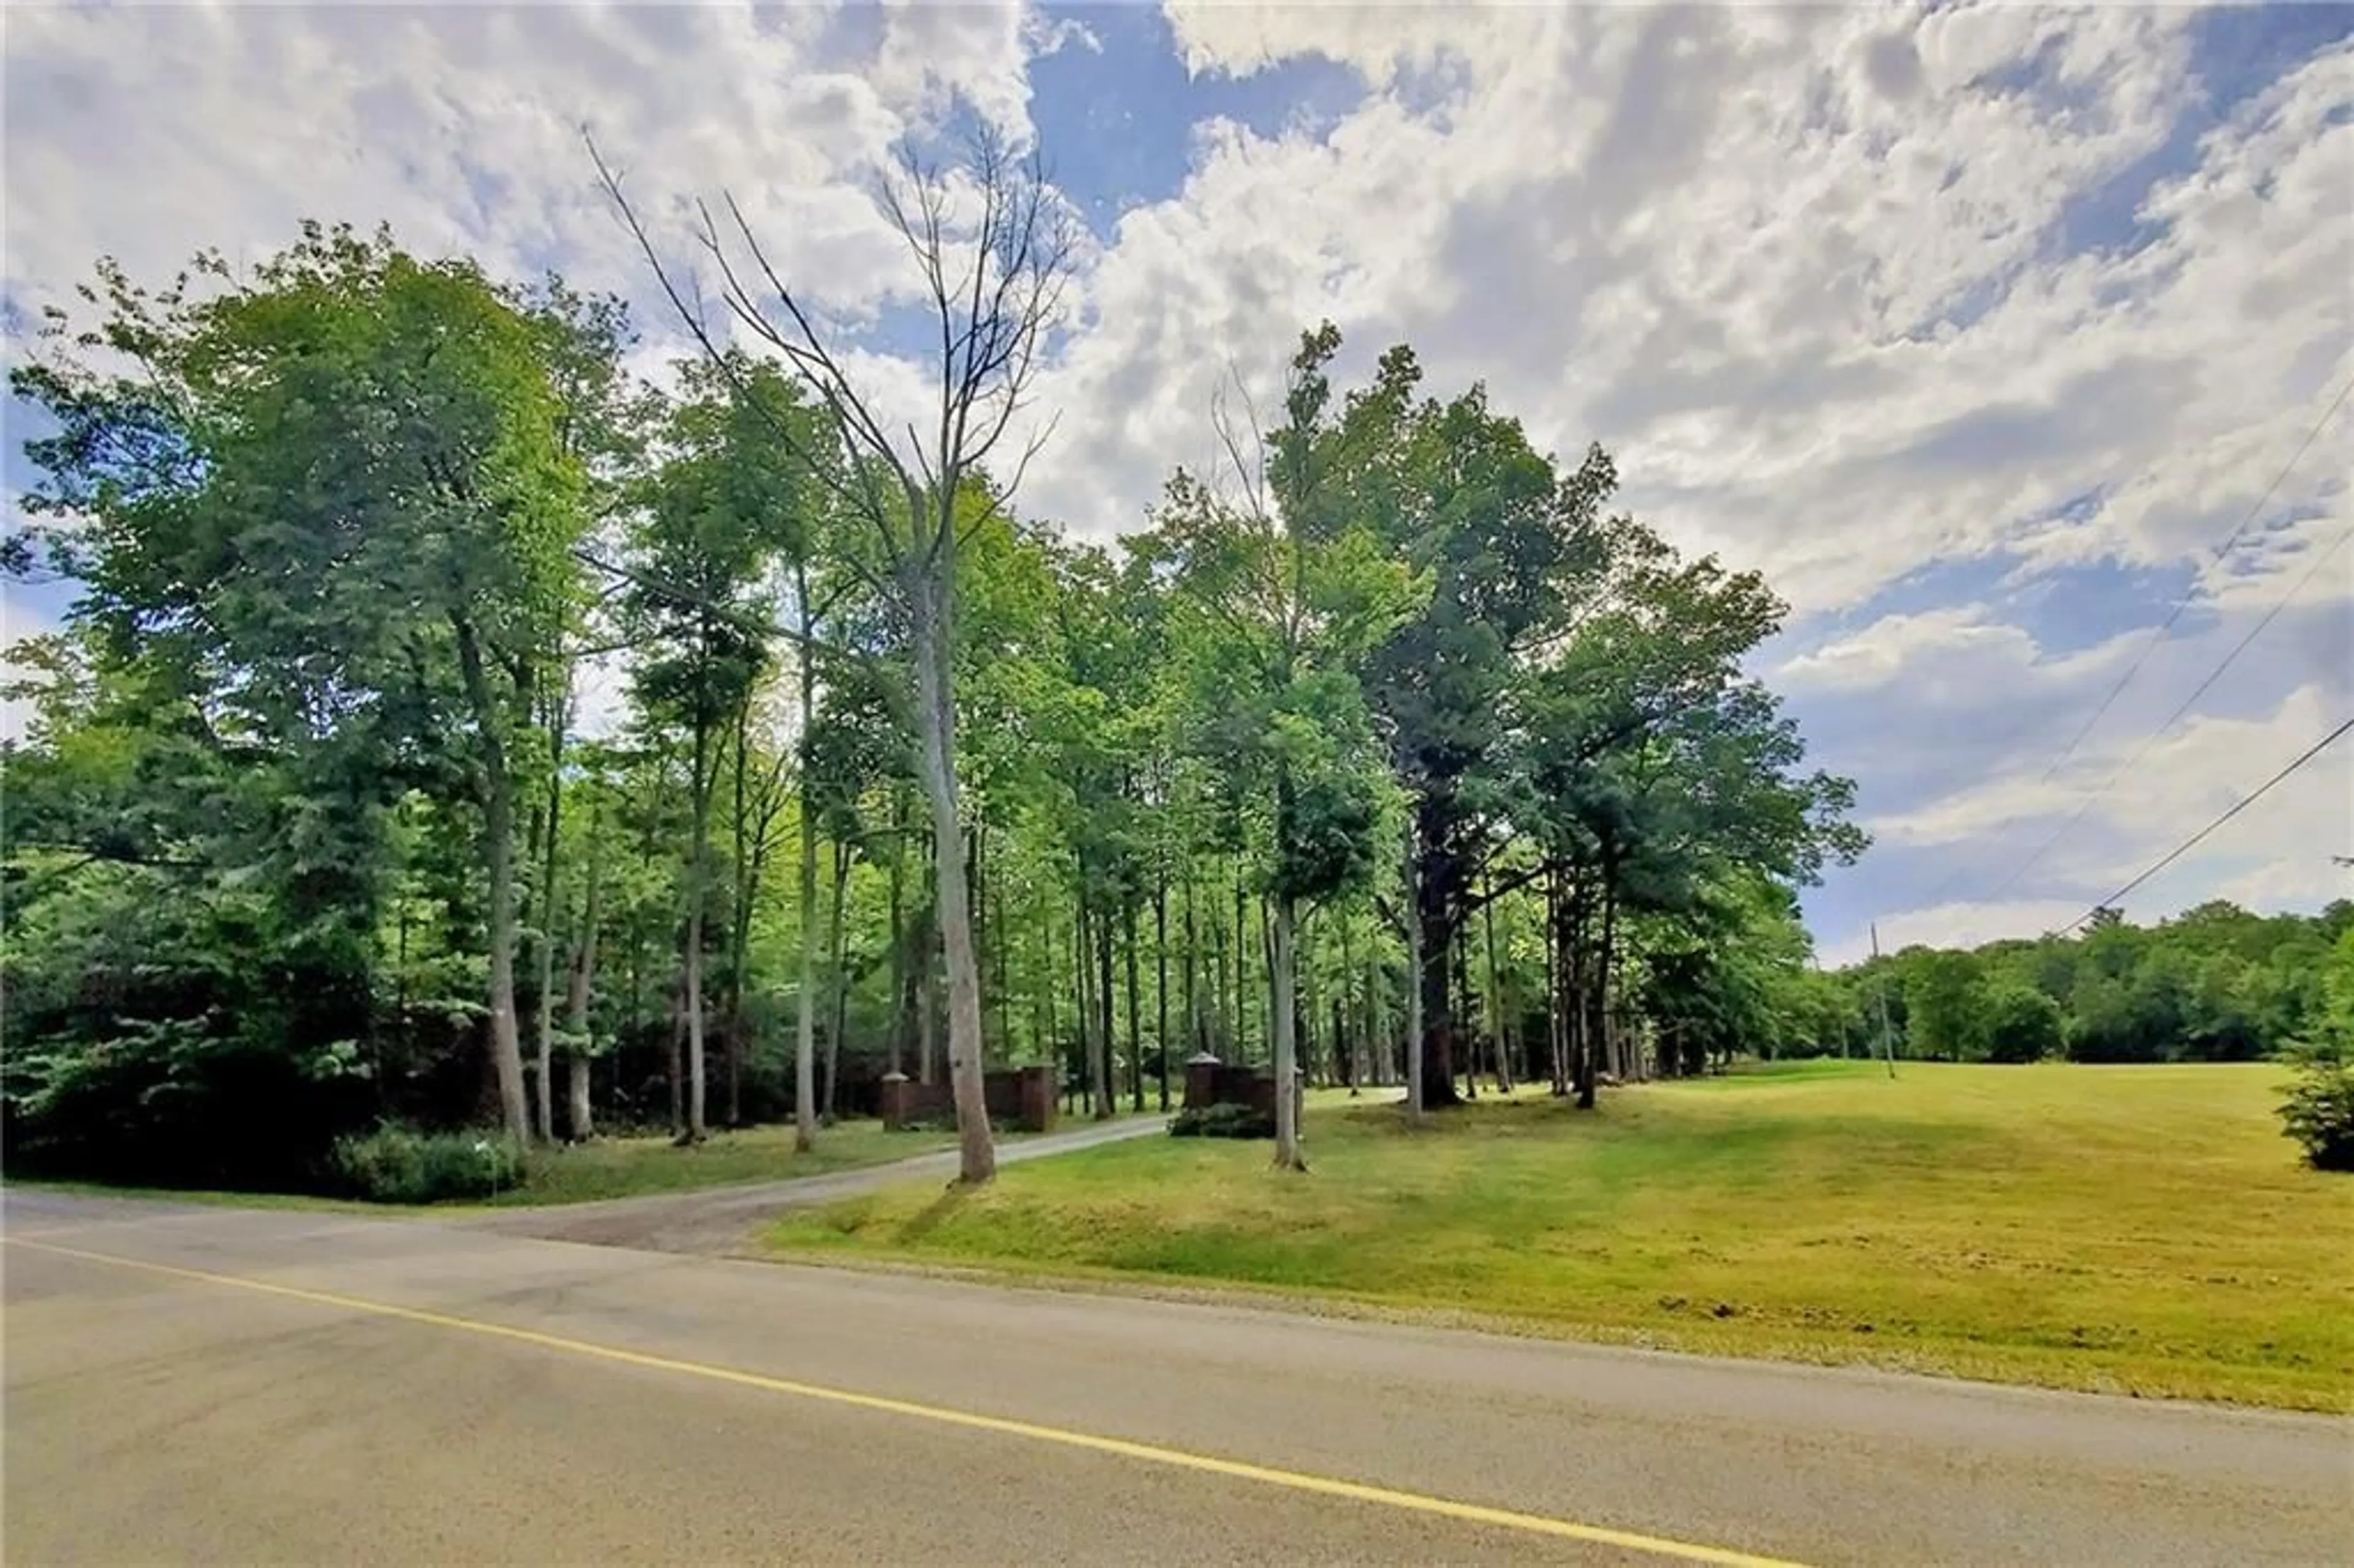 Street view for 902 SHAVER Rd, Ancaster Ontario L9G 3K9